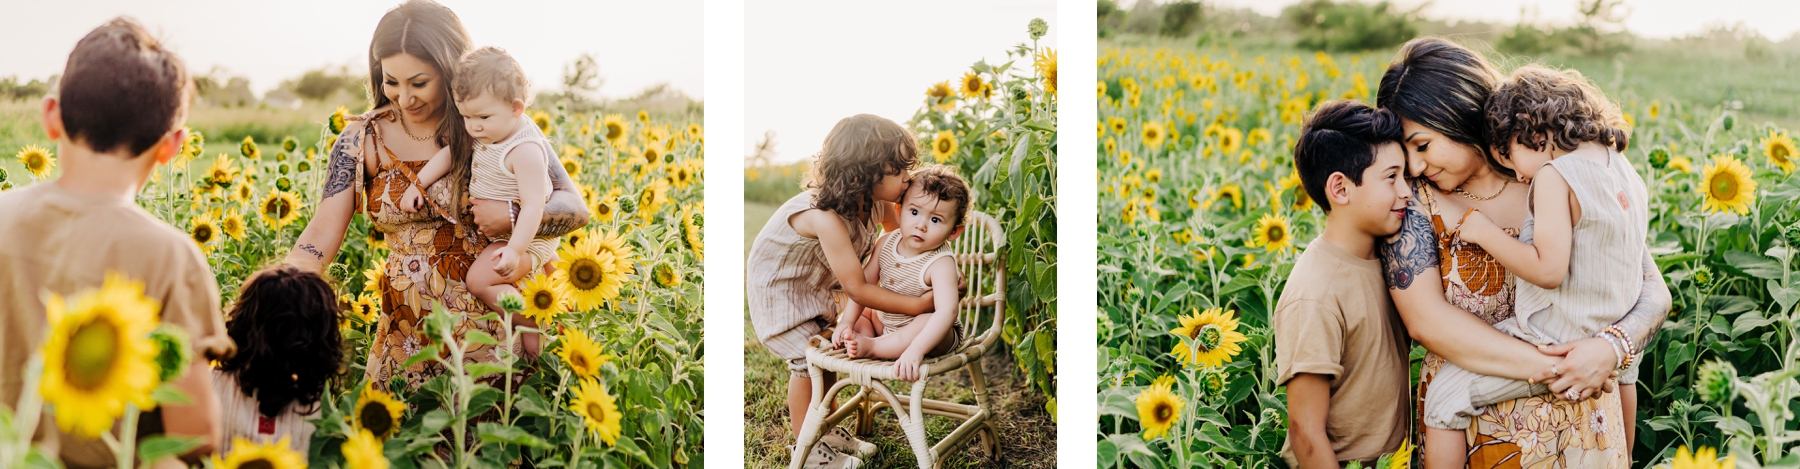 Mommy and me session in the sunflower fields at Green Valley Gardens in North Dallas, Texas. | Dallas Family Photographer | Green Valley Gardens 